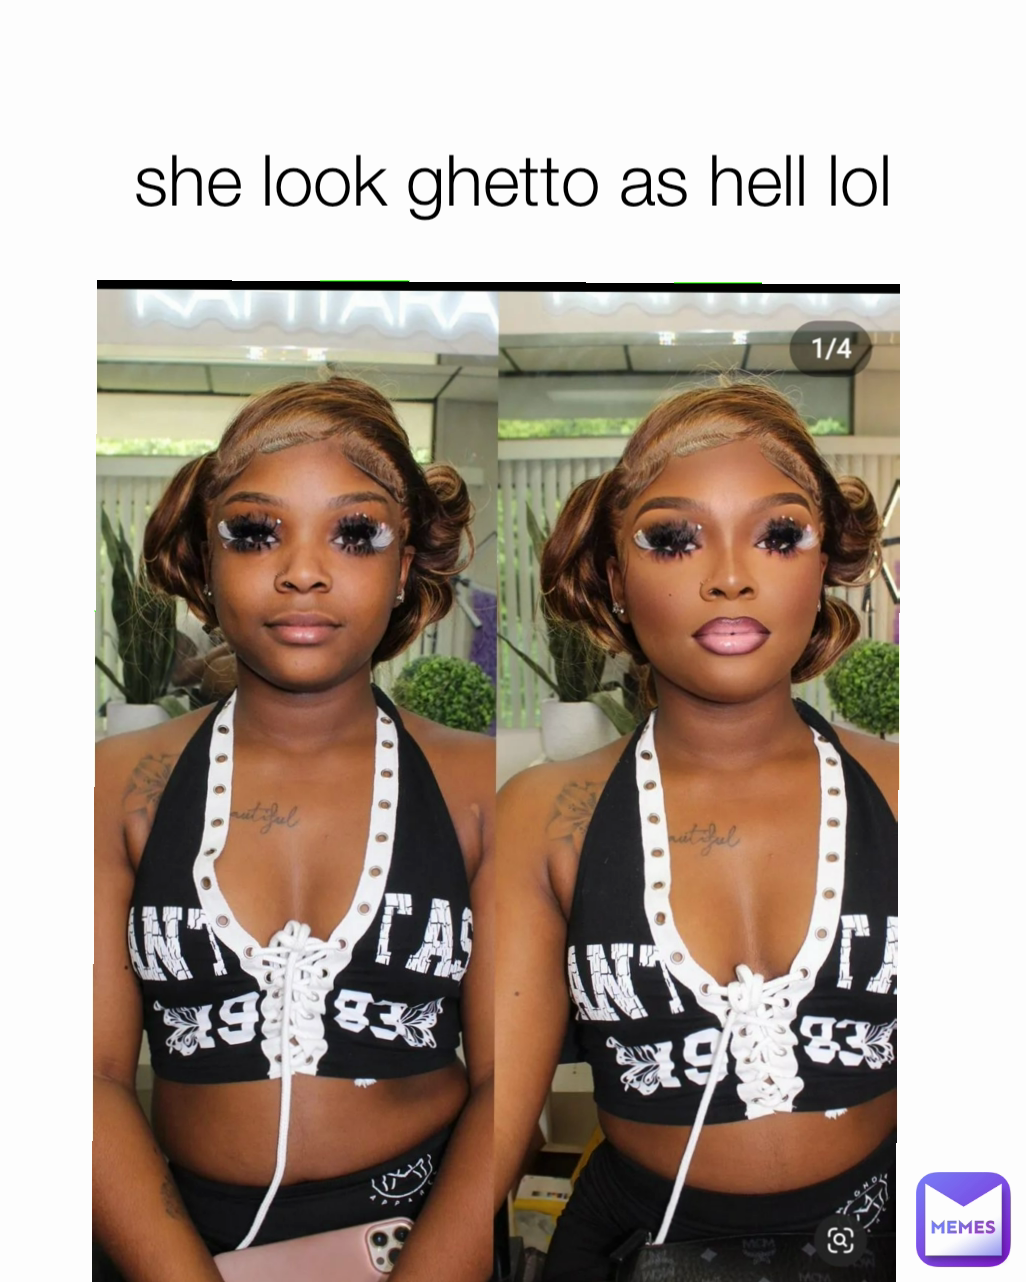 she look ghetto as hell lol